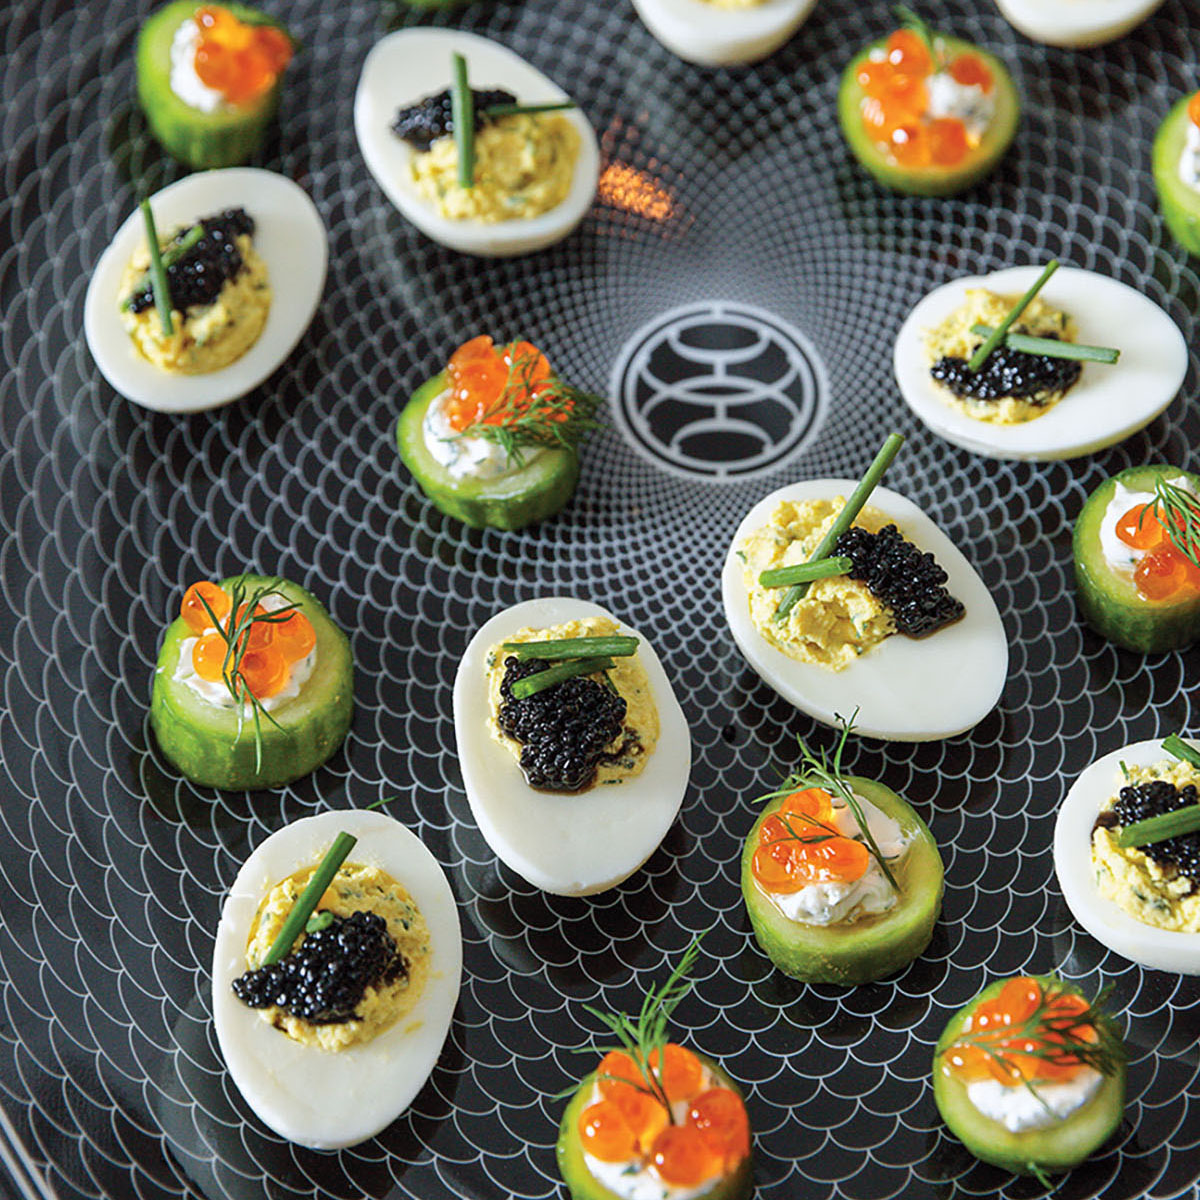 DEVILED EGGS WITH CHIVES AND CAVIAR